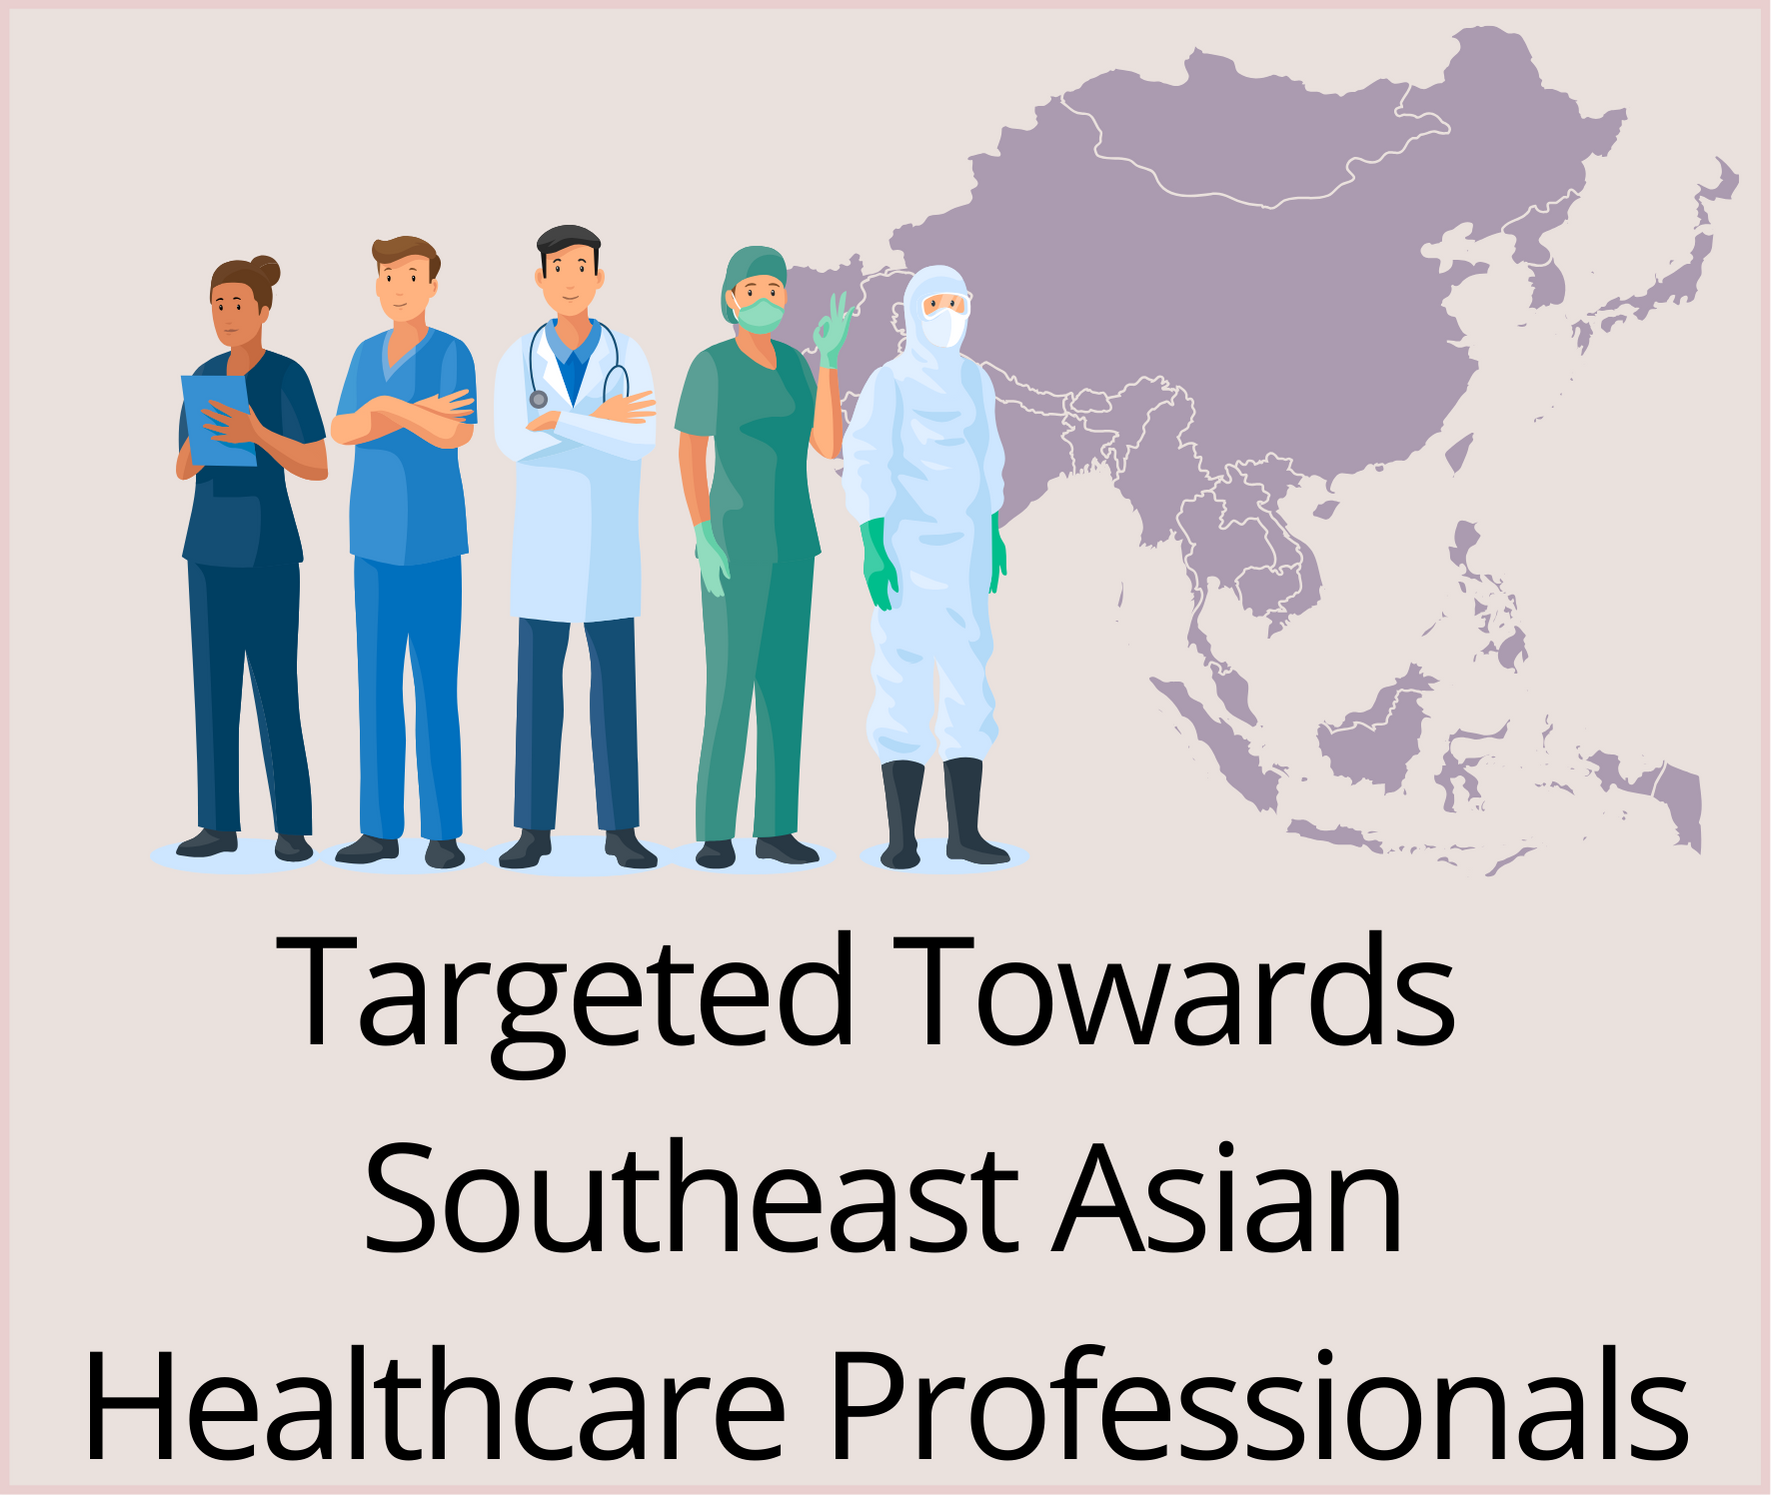 Targeted towards Southeast Asian Healthcare Professionals
